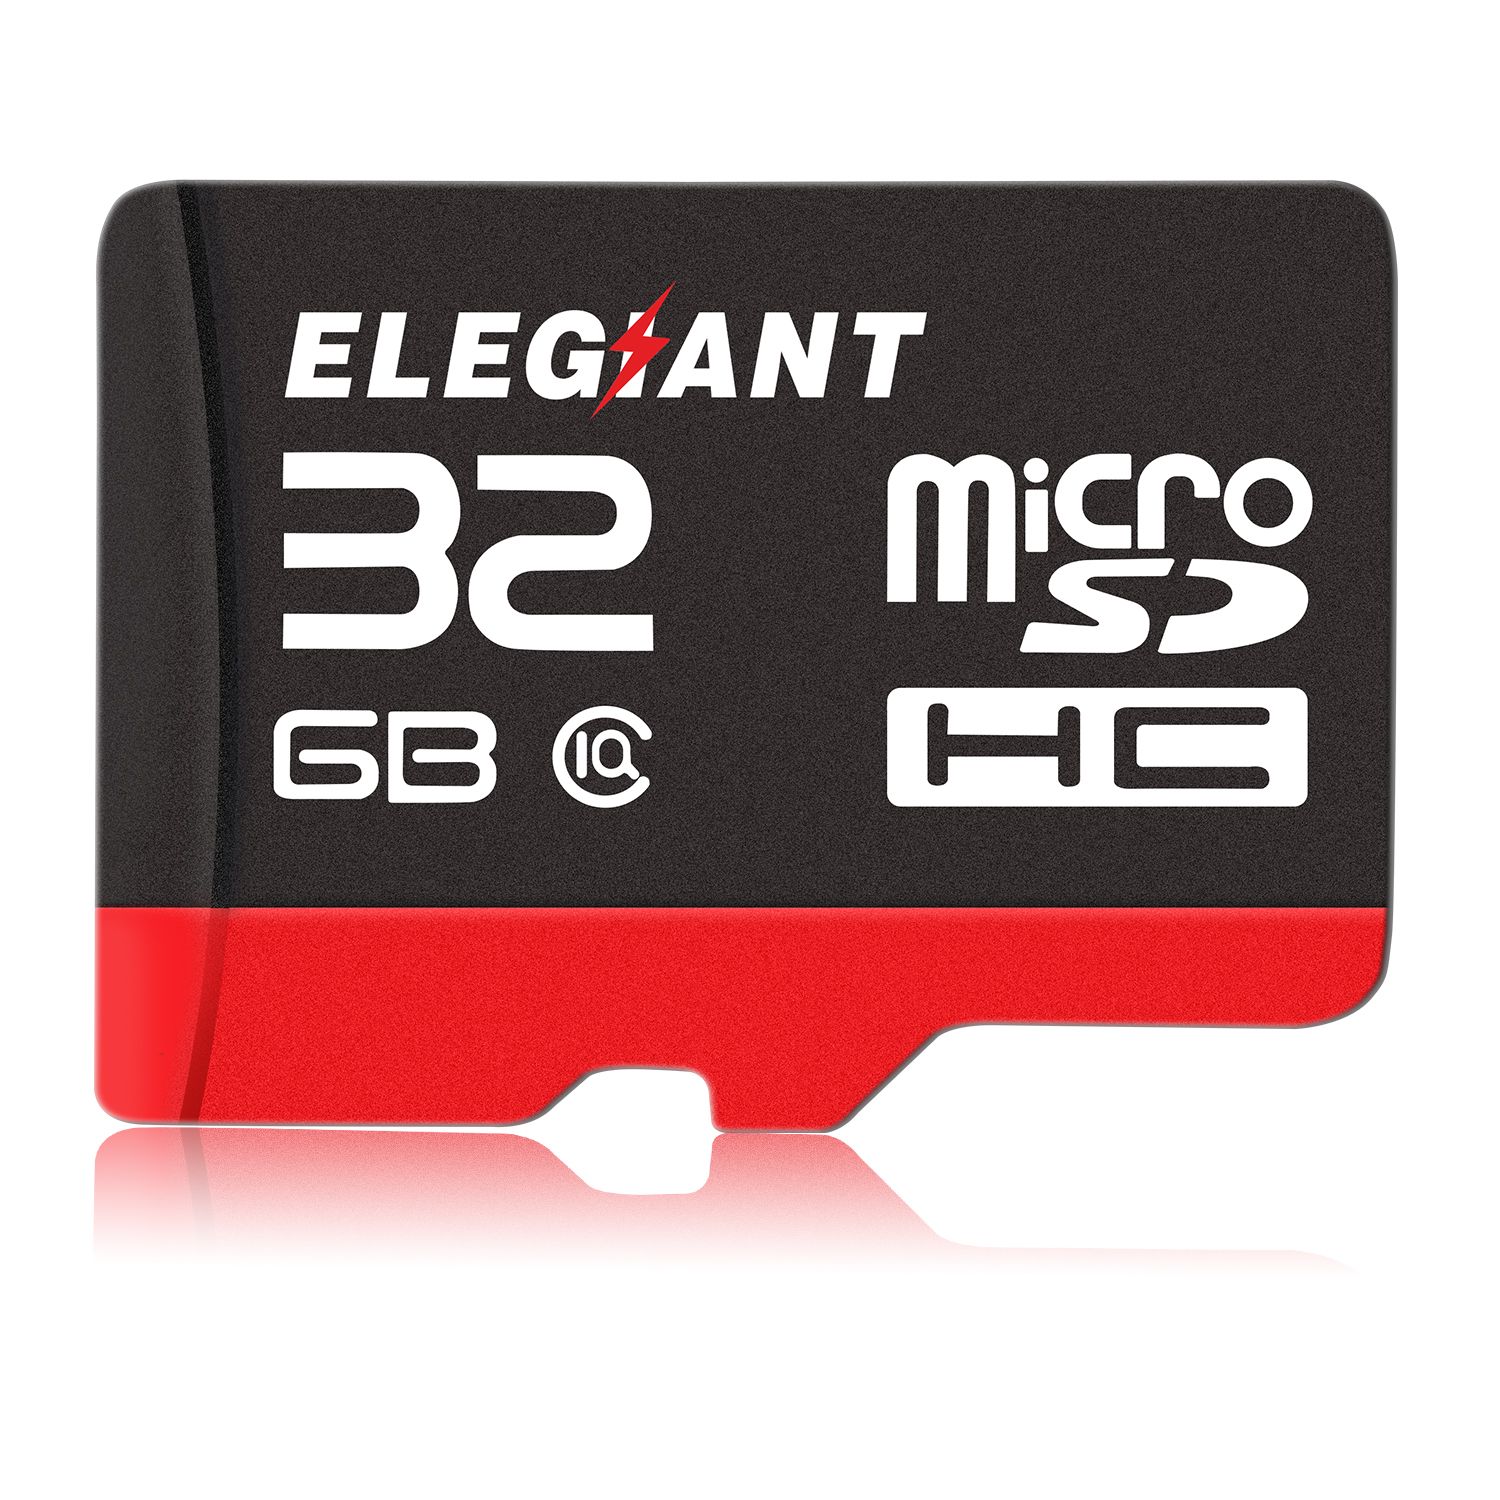 ELEGIANT-32GB-Memory-Card-Professional-Class-10-Card-Memory-Card-for-Computer-Cameras-and-Camcorders-1759959